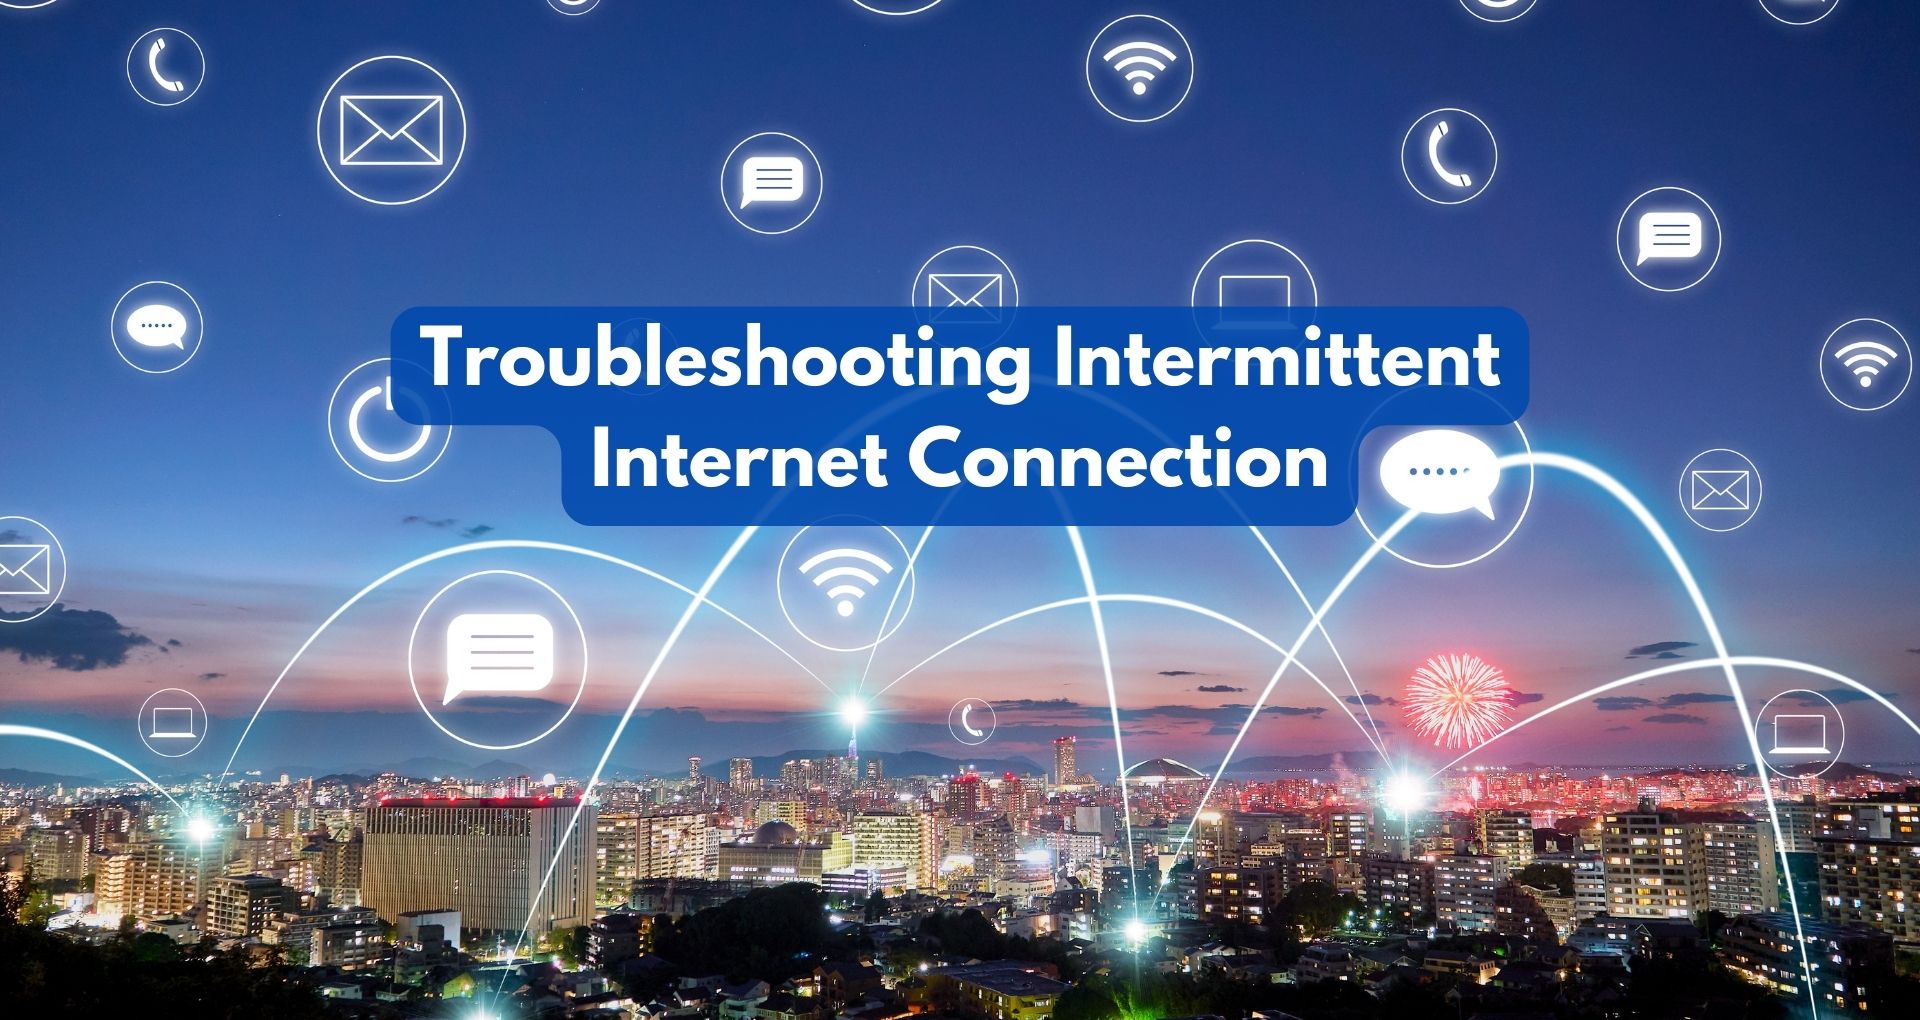 Troubleshooting Intermittent Internet Connection